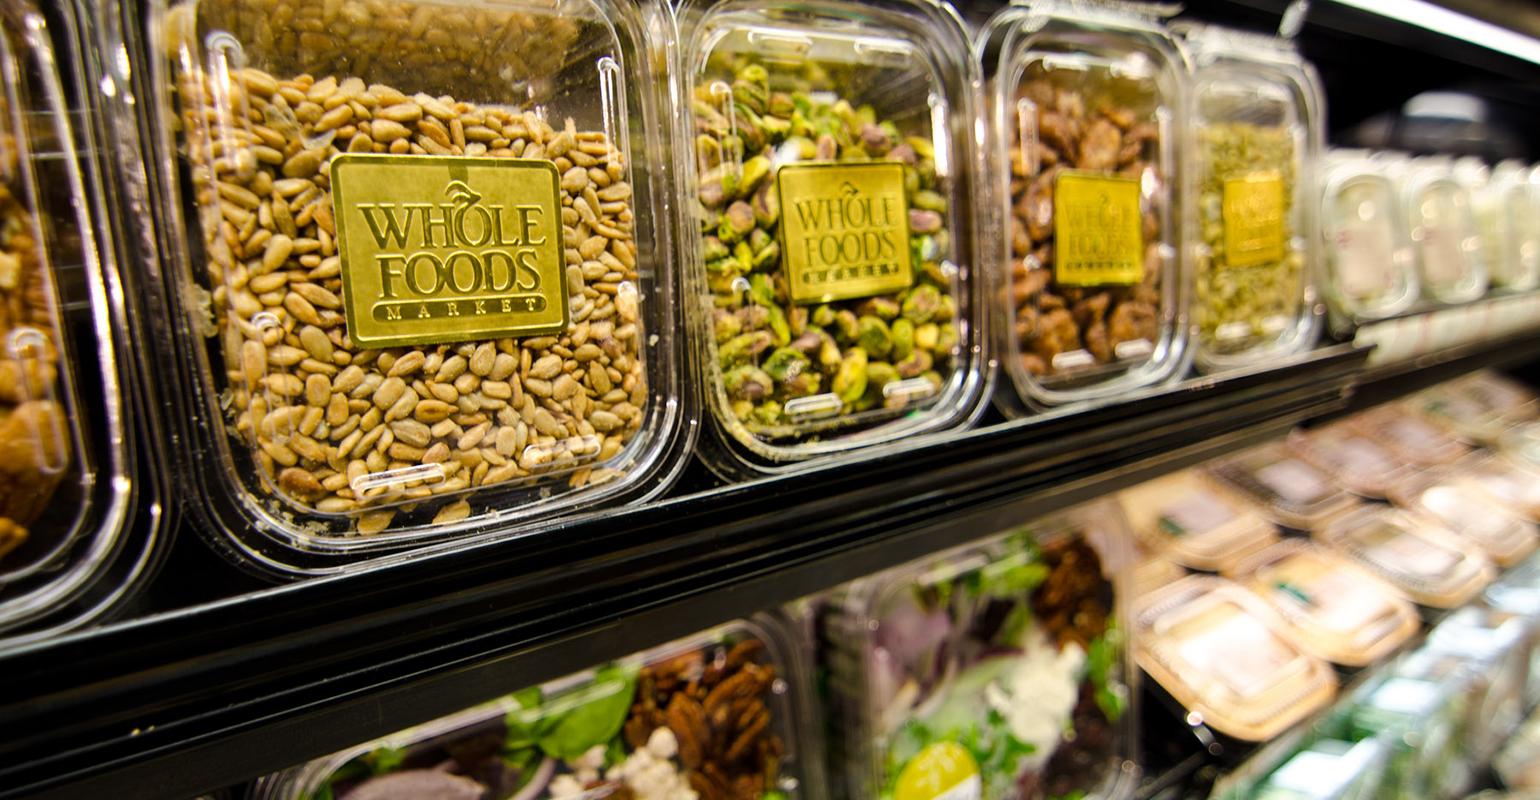 Whole Foods ends meatless Monday prepared foods promotion, 2019-01-22